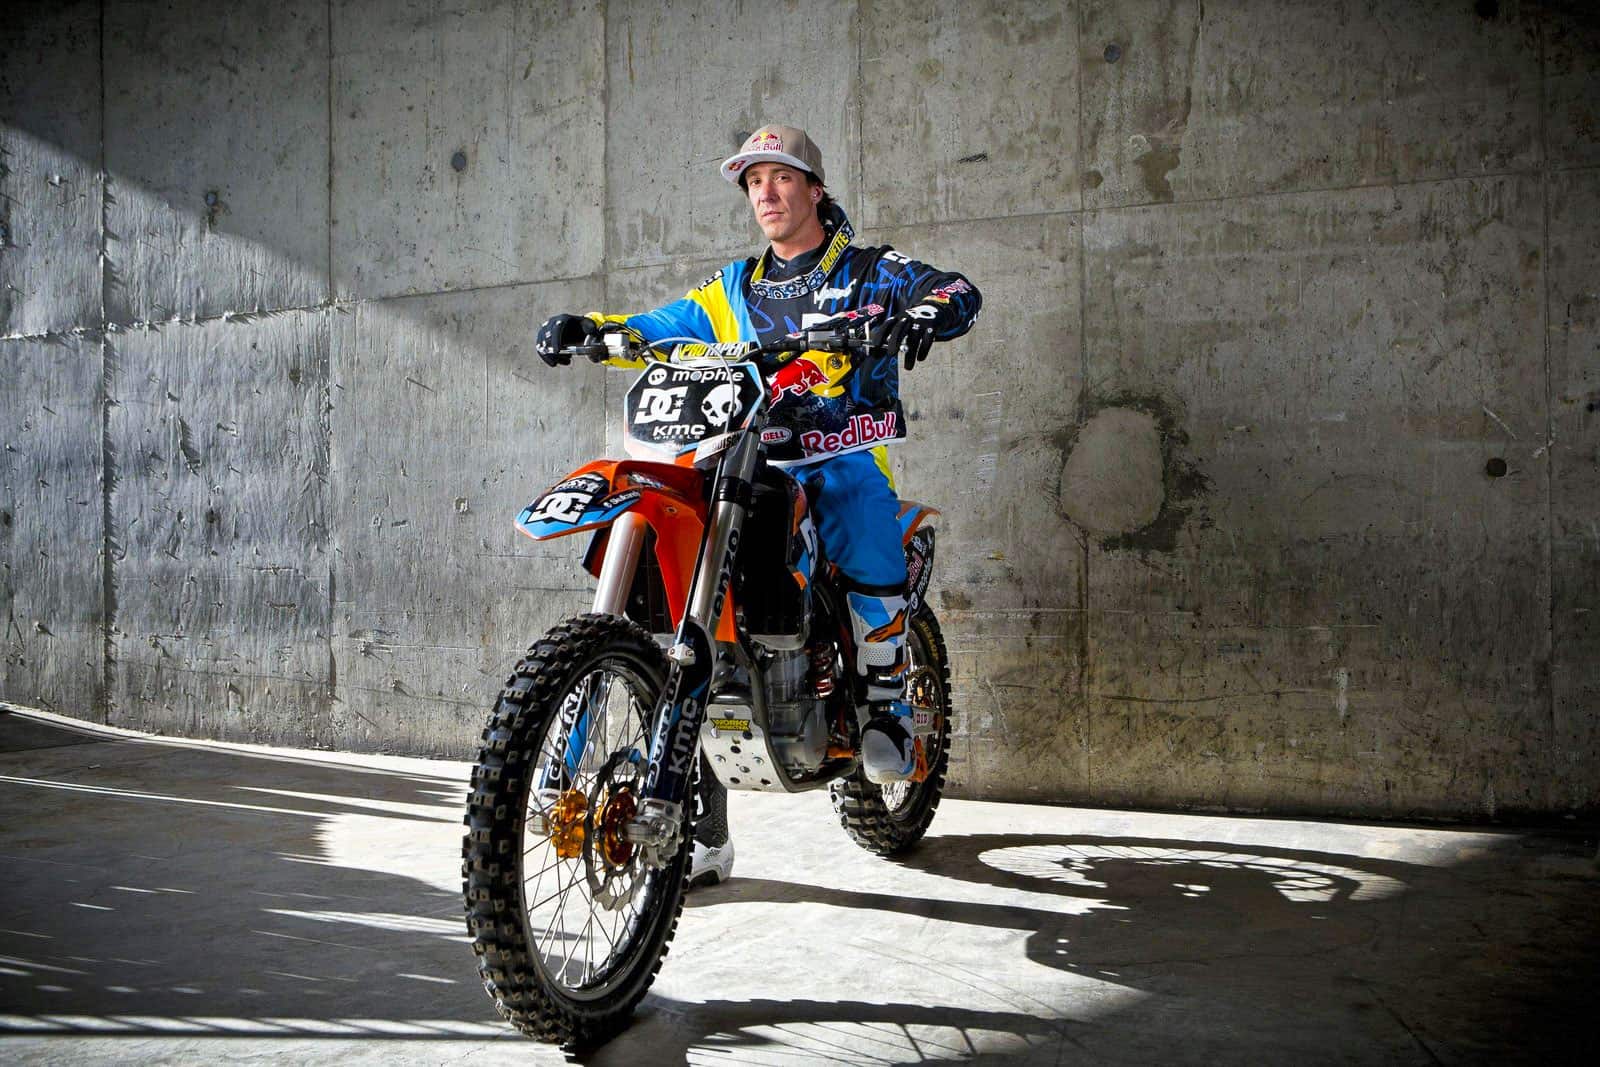 Robbie Maddison on his freestyle dirt bike of choice